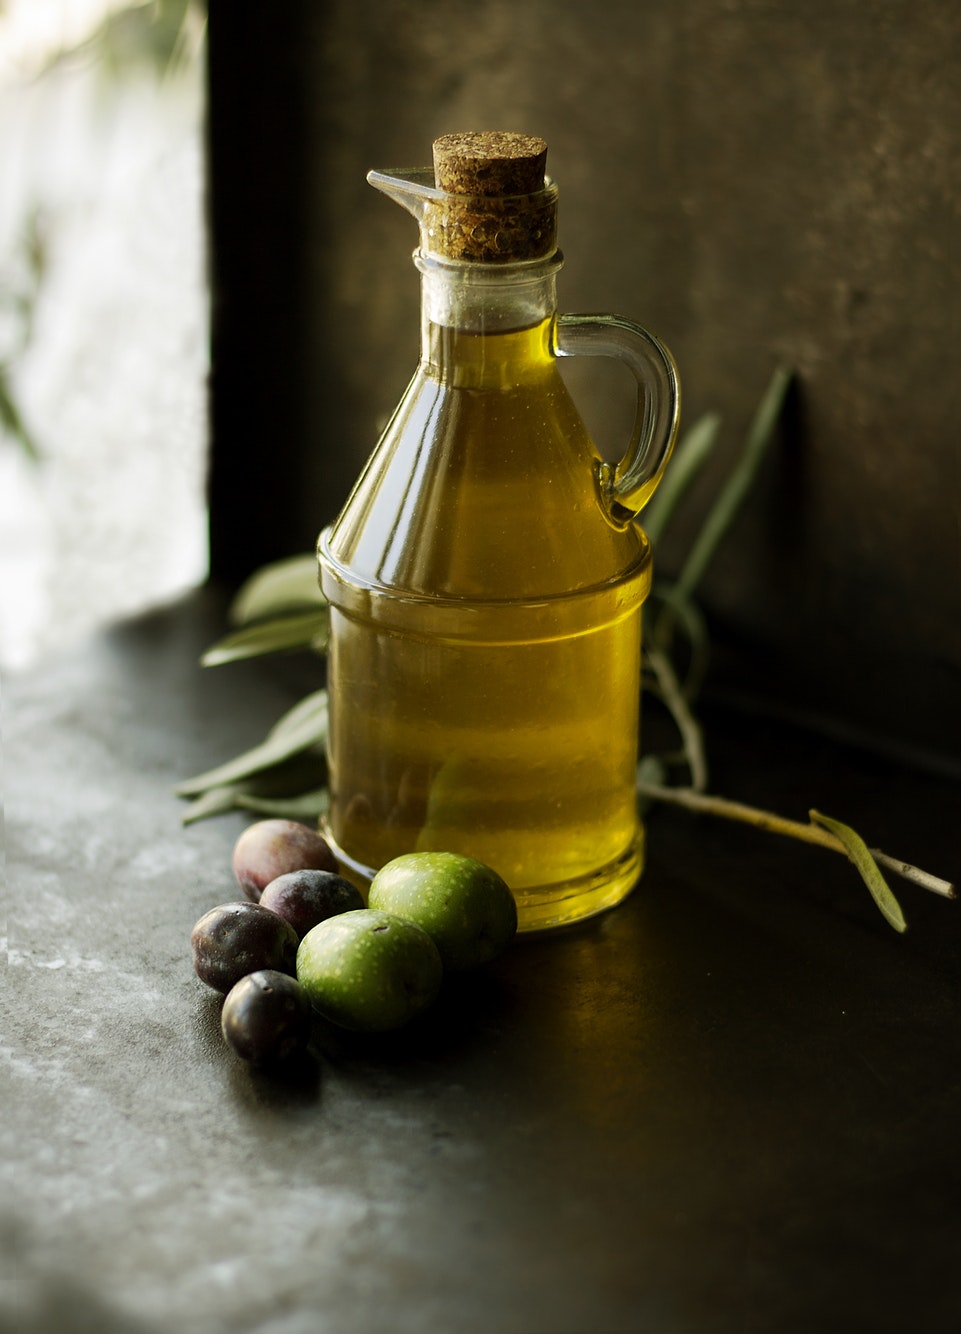 ENTITY shares 7 DIY face masks, including two variations of a brown sugar scrub. PHOTO OF OLIVE OIL VIA UNSPLASH/@ROBERTINA